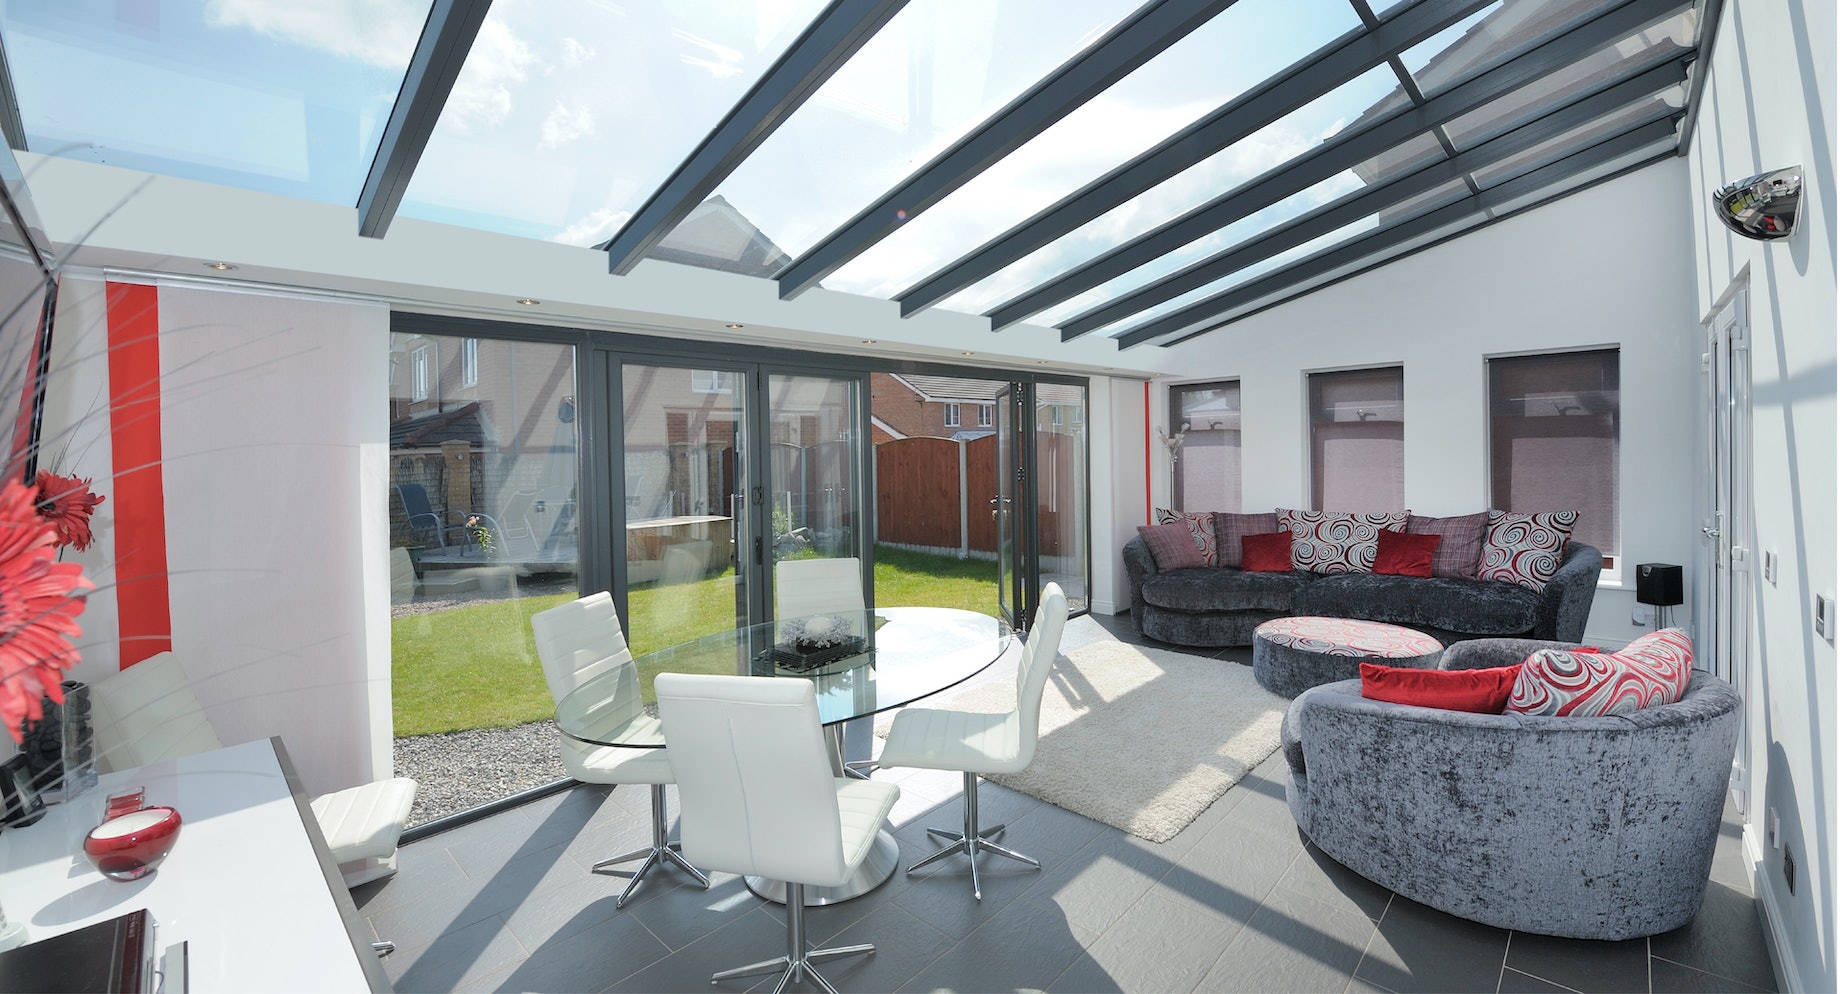 Lean To Conservatories Edinburgh And The Lothians Bryant And Cairns